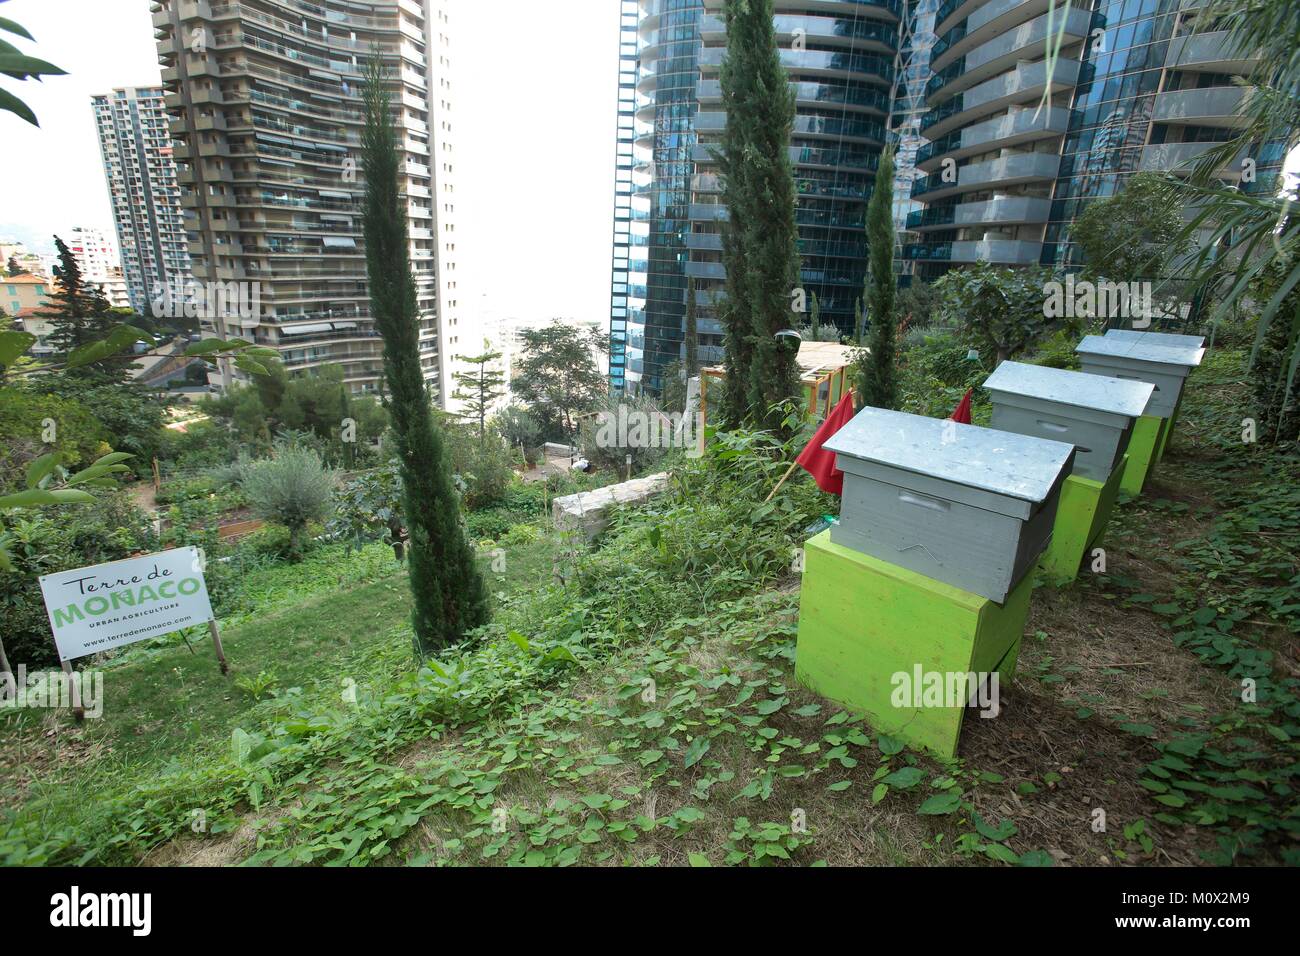 Principality of Monaco,Monaco,Jessica Sbaraglia founder of Terre de Monaco working in her kitchen garden at the foot of the Odeon tower. Launched in 2016 by Jessica,former Swiss model,Terre de Monaco has become the world's largest privately owned farm for urban agriculture. Stock Photo